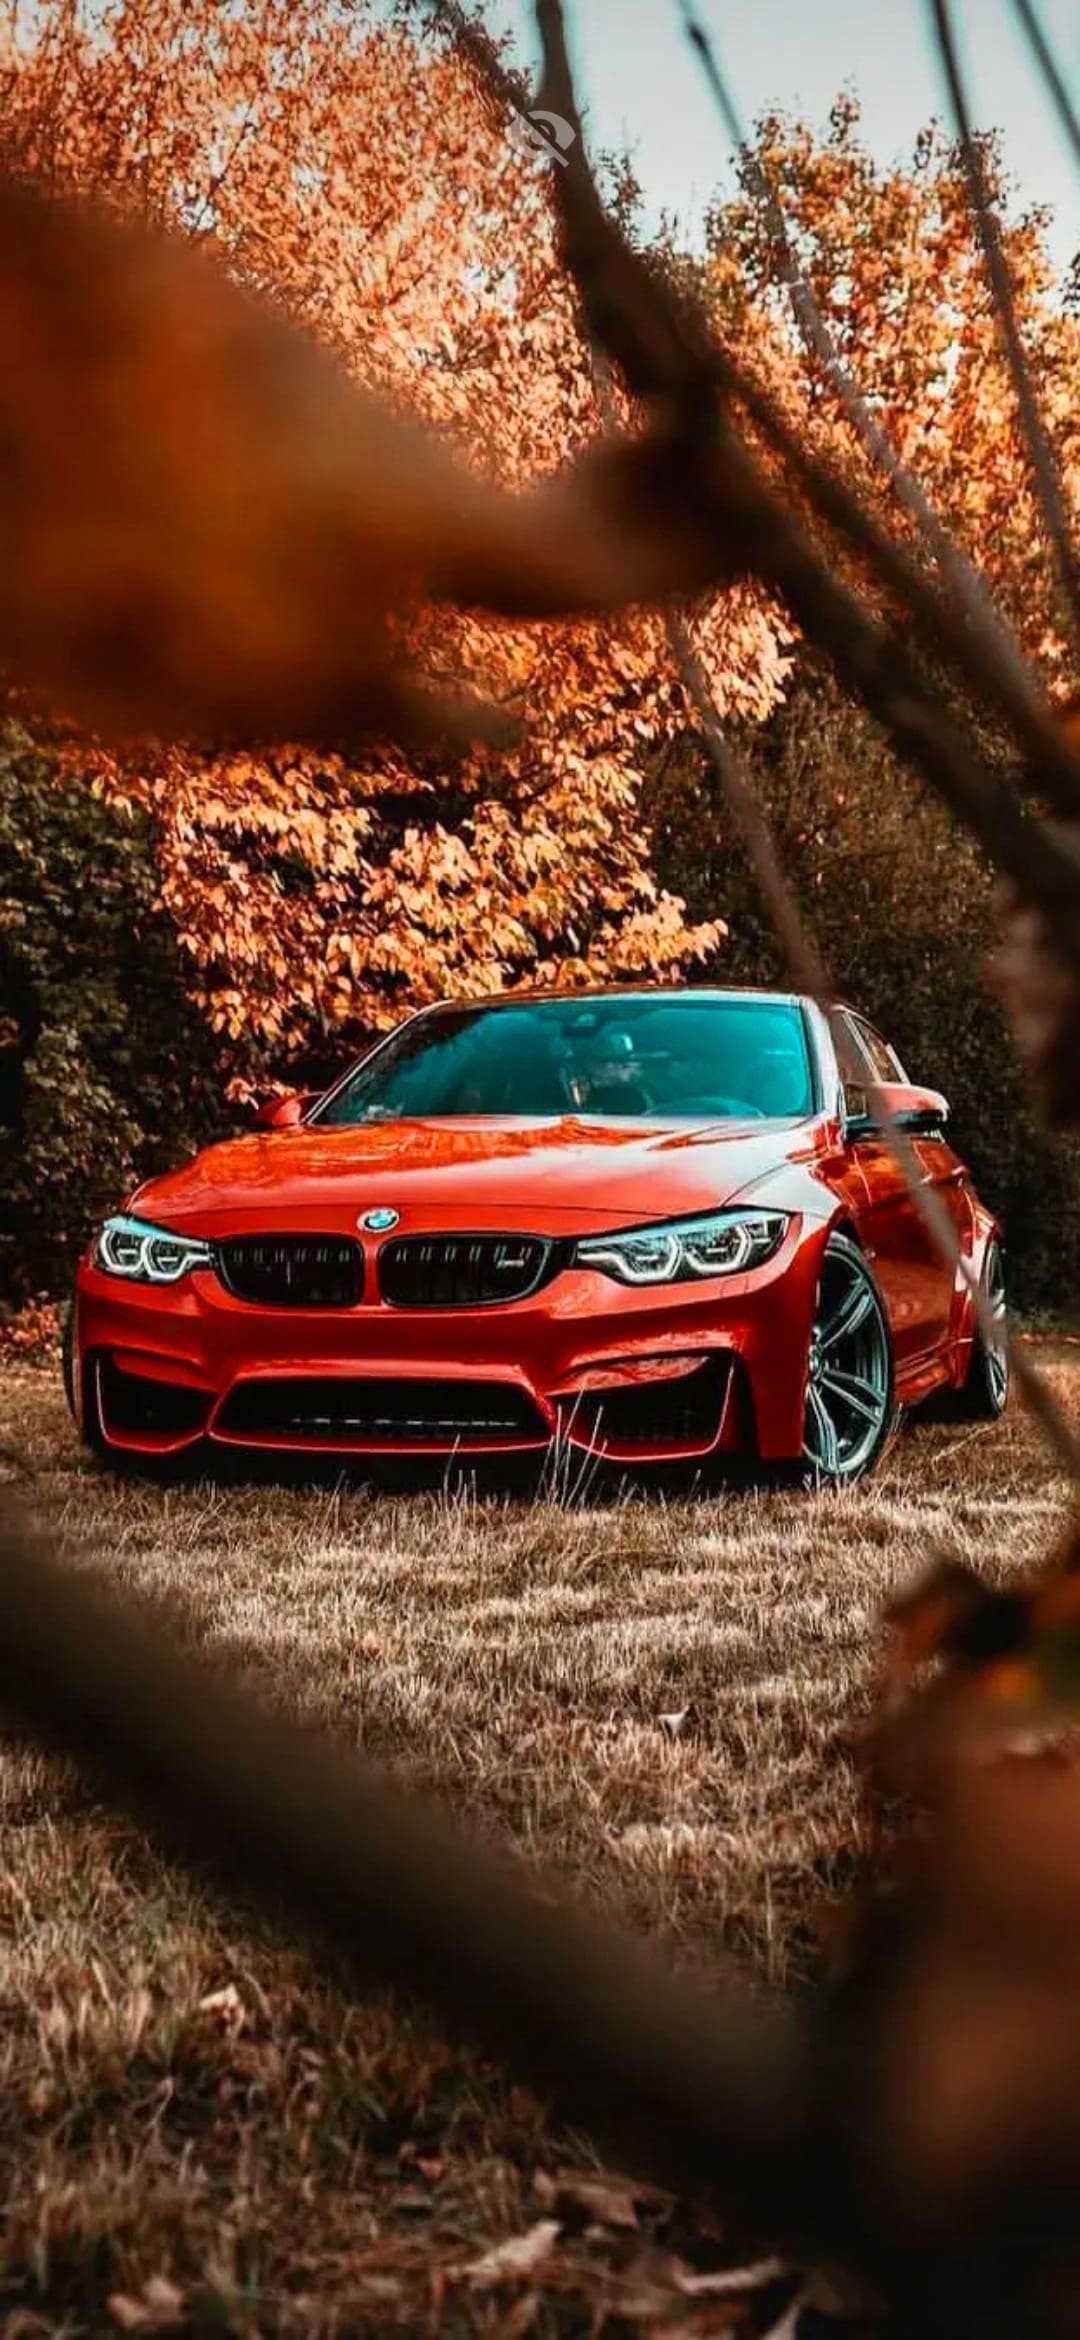 IPhone wallpaper of a red BMW M4 in a forest - BMW